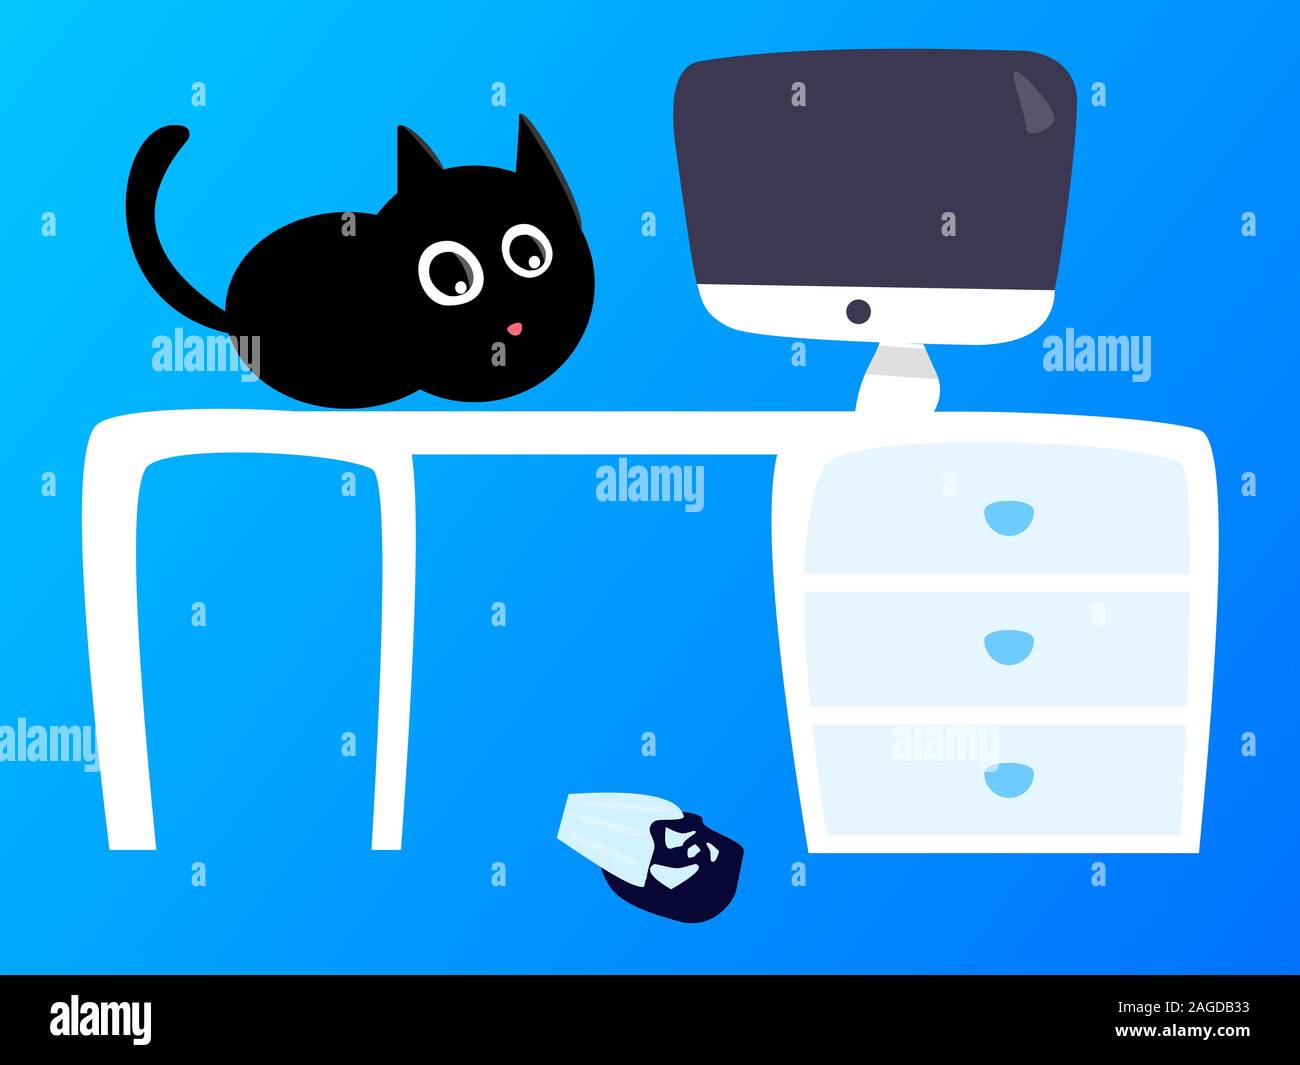 Clip art of a black cat on a white table with a computer screen on it on a blue background Stock Photo